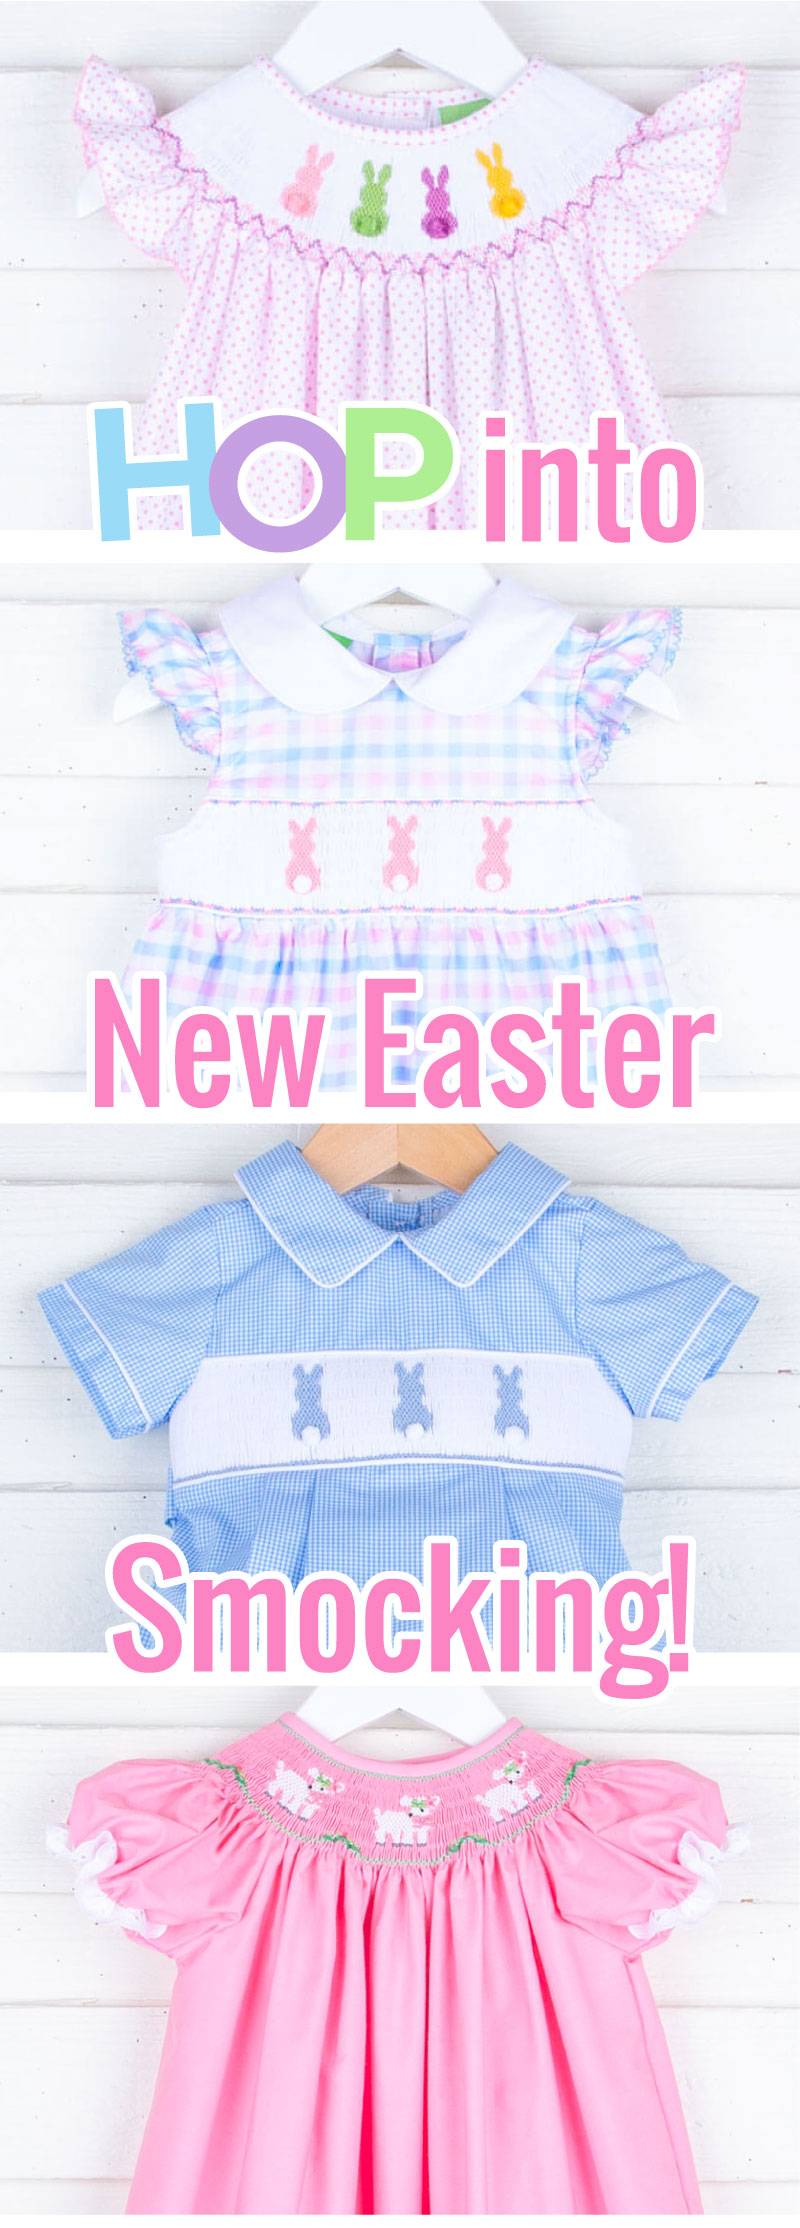 Hop into New Easter Smocking!